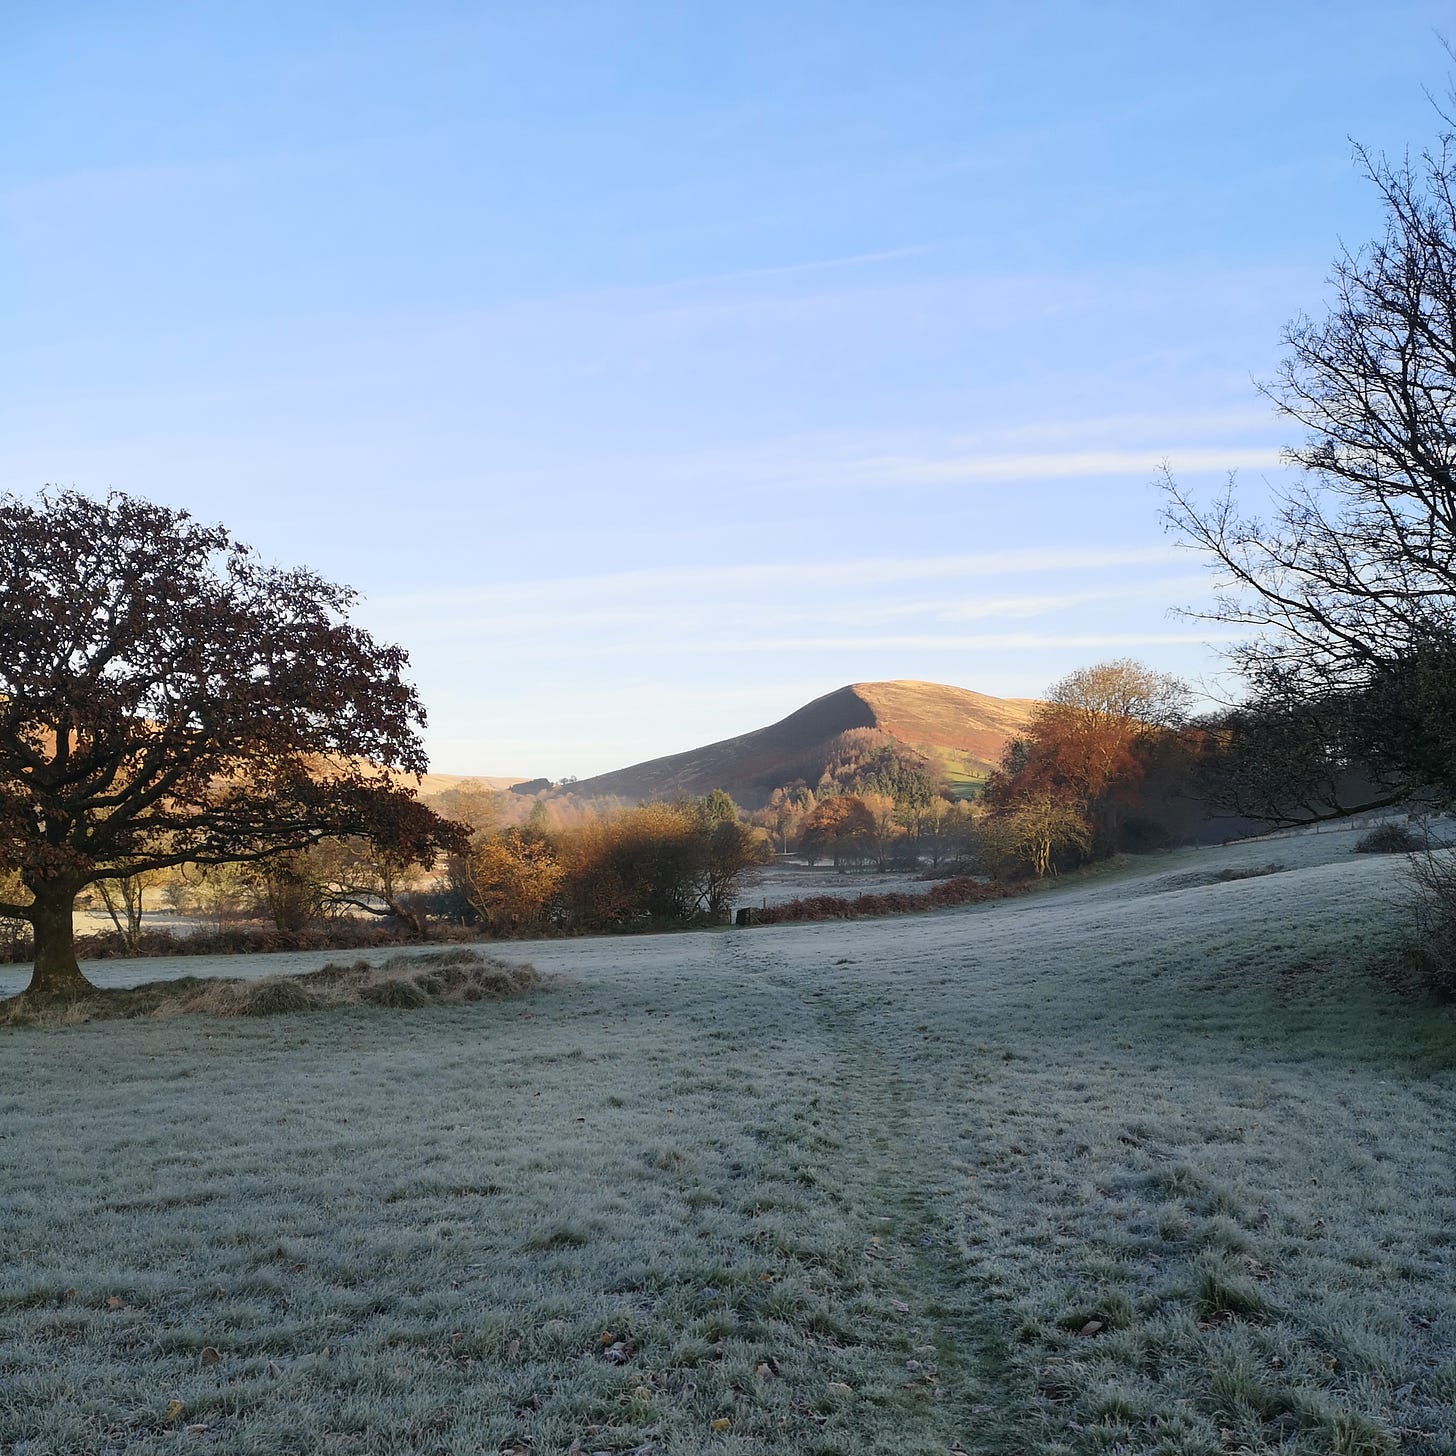 Image description: A bright frosty morning view across a field with a big oak tree towards a mountain in the distance, beneath a hazy blue sky.